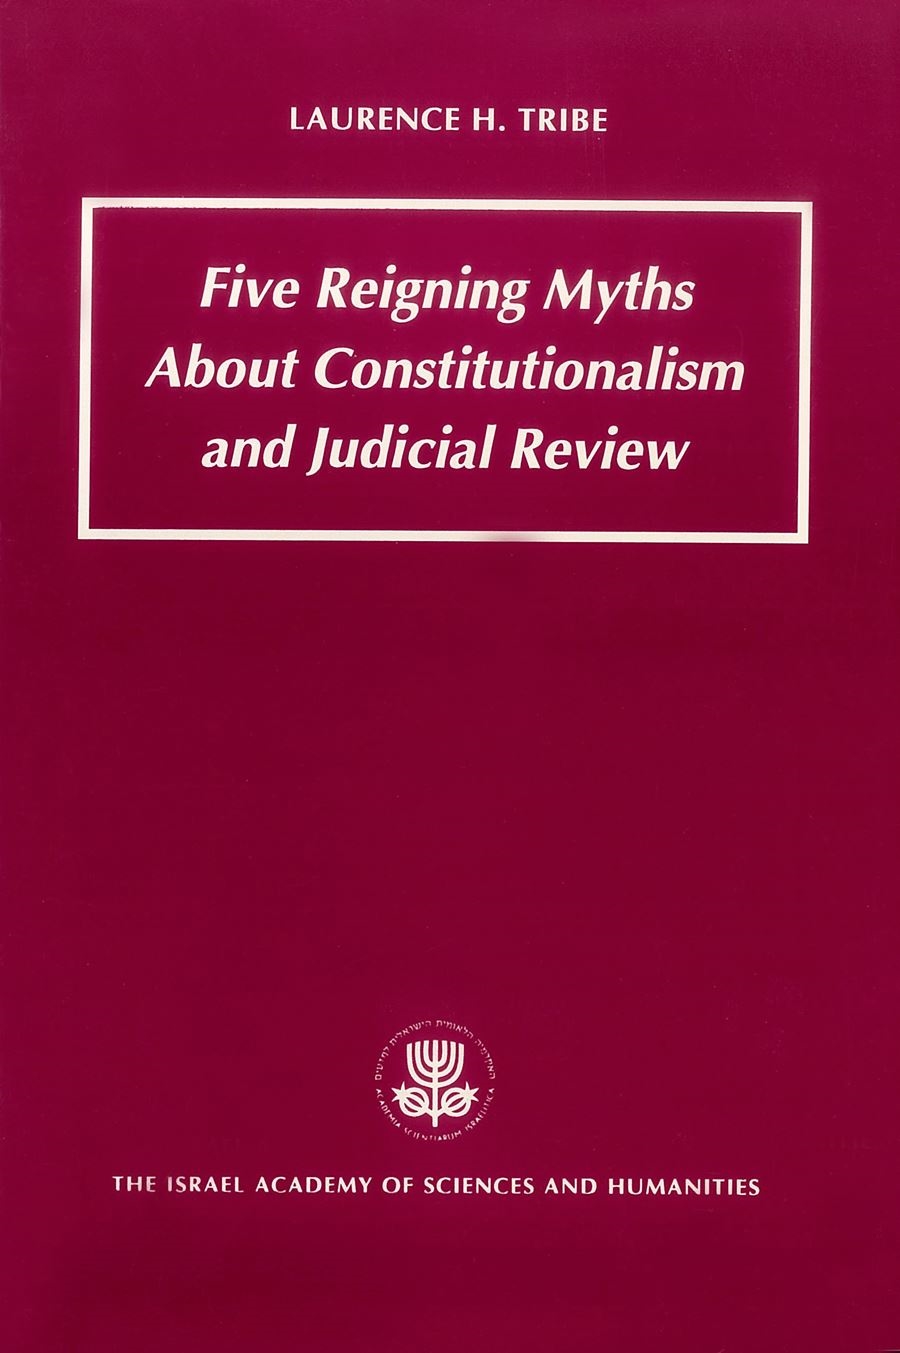 Five Reigning Myths about Constitutionalism and Judicial Review